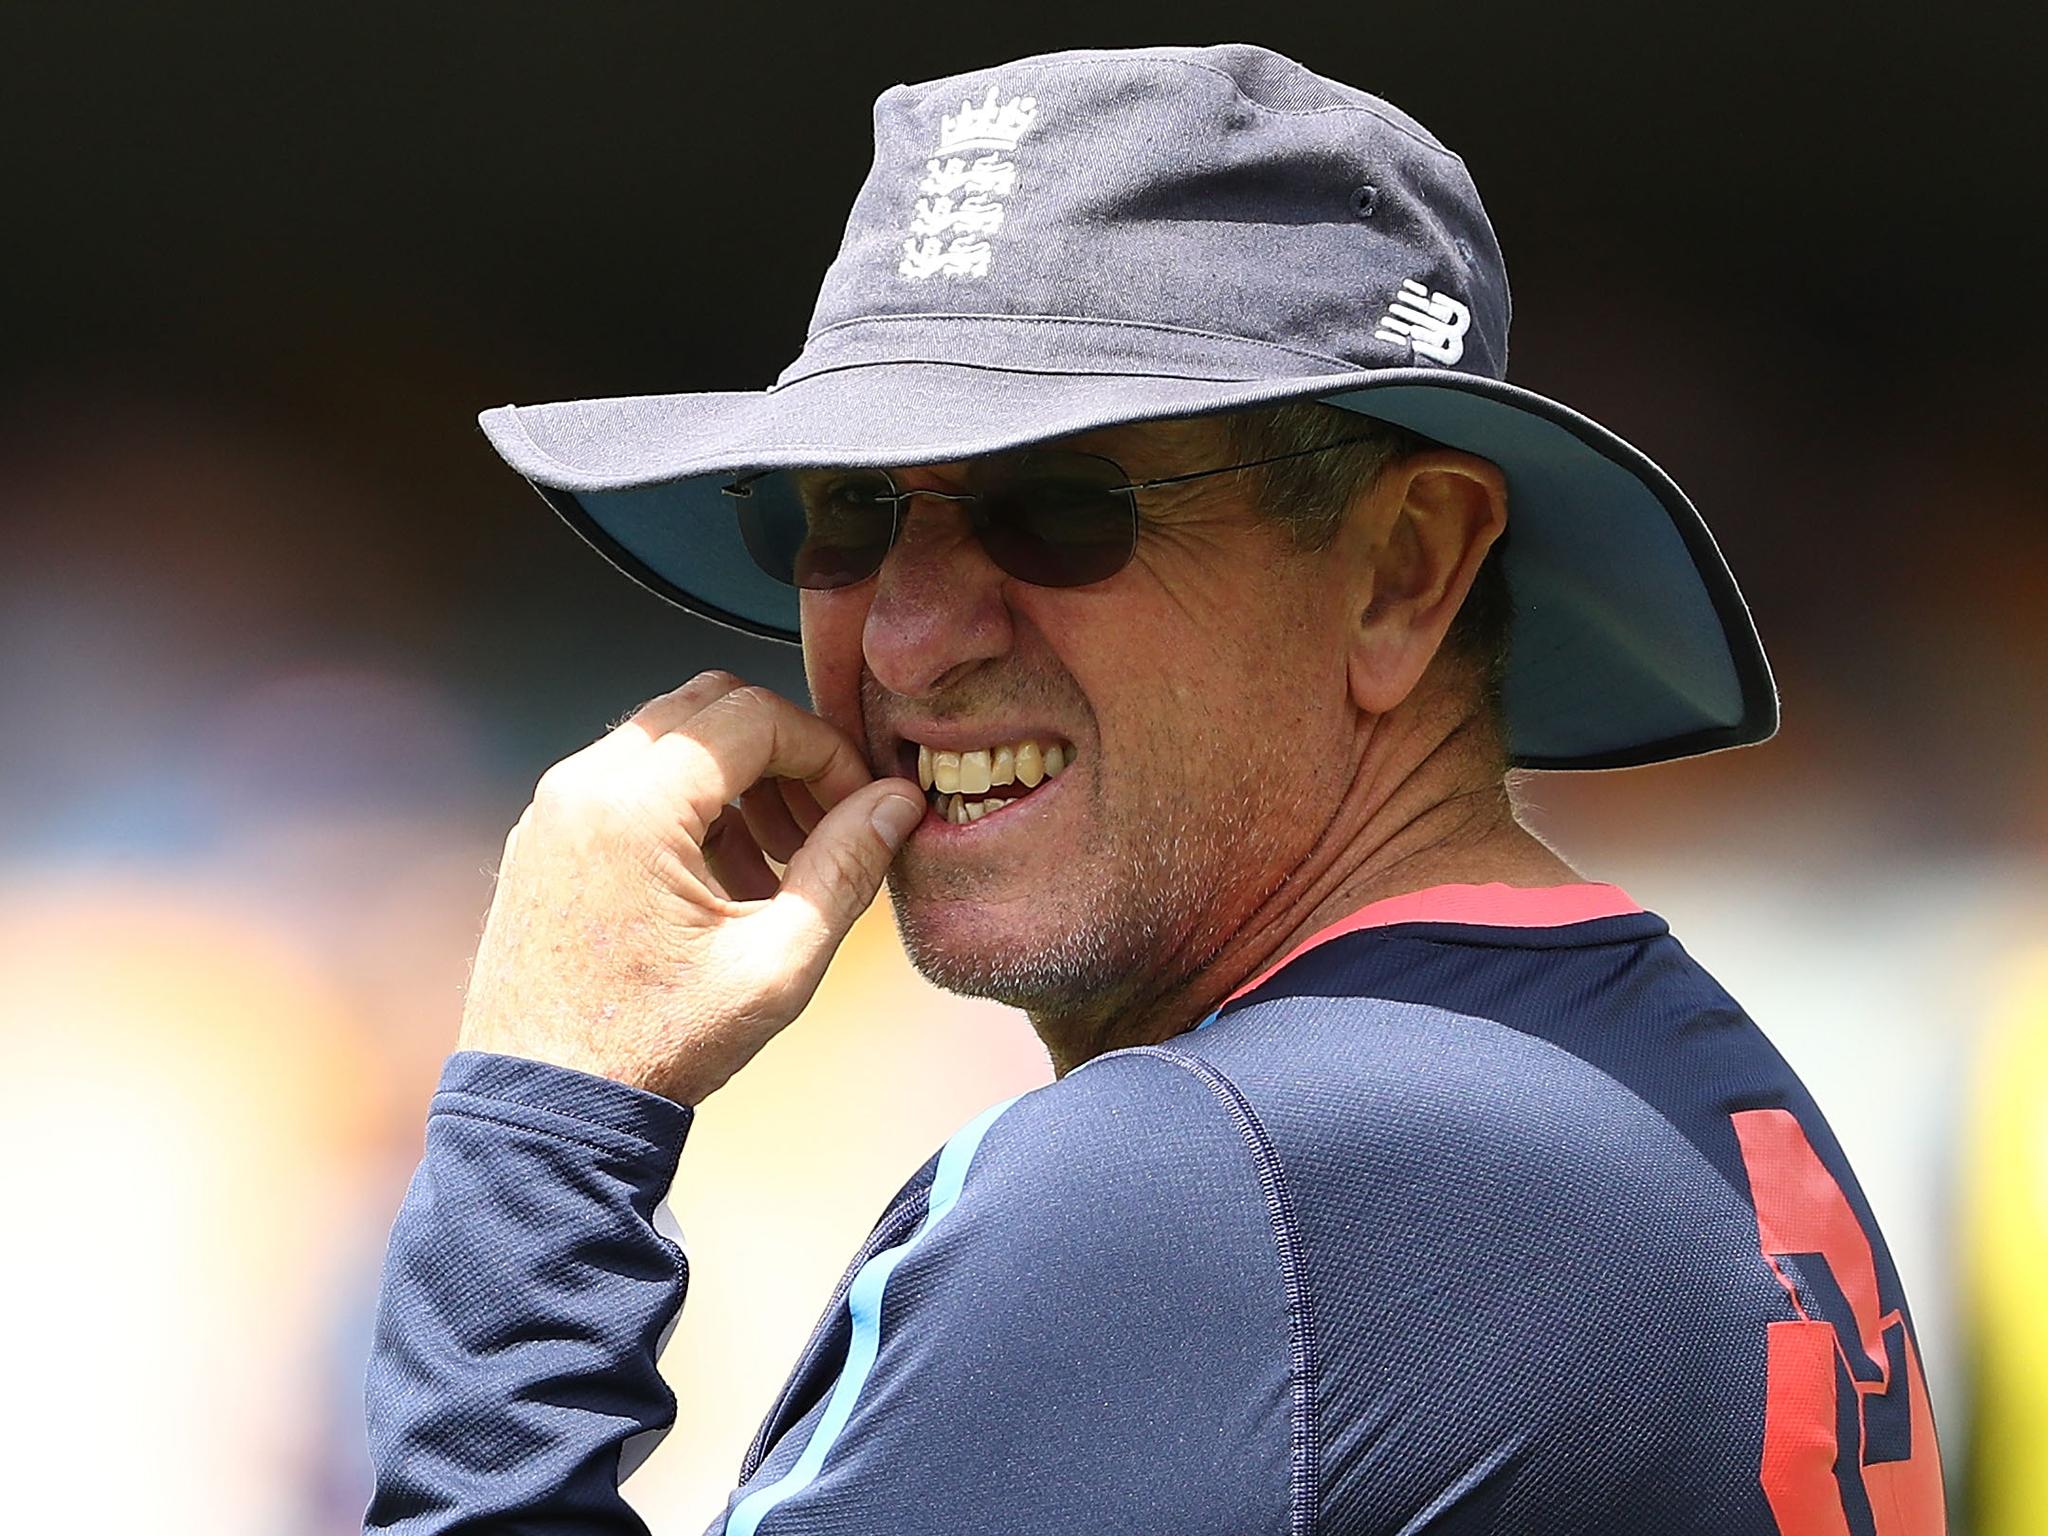 Trevor Bayliss described the offence as 'trivial'